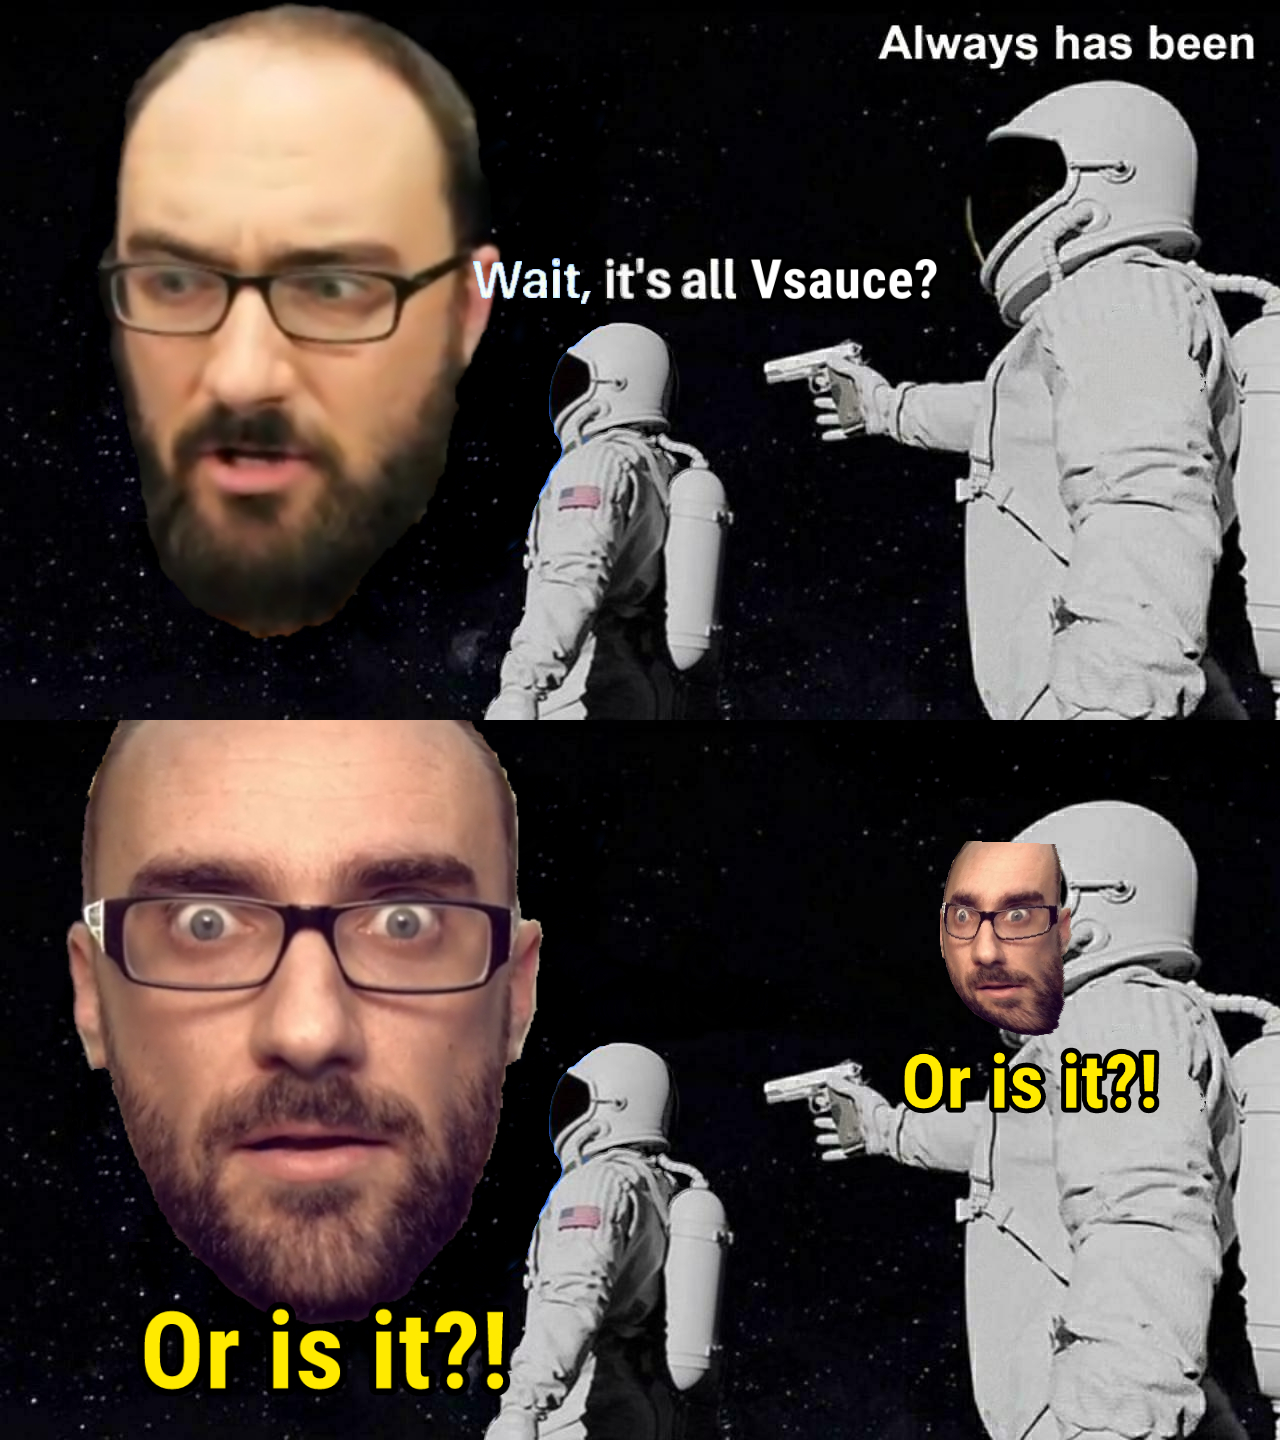 its all vsauce meme, its all vsauce astronaut meme, its all vsauce astronaut gun meme